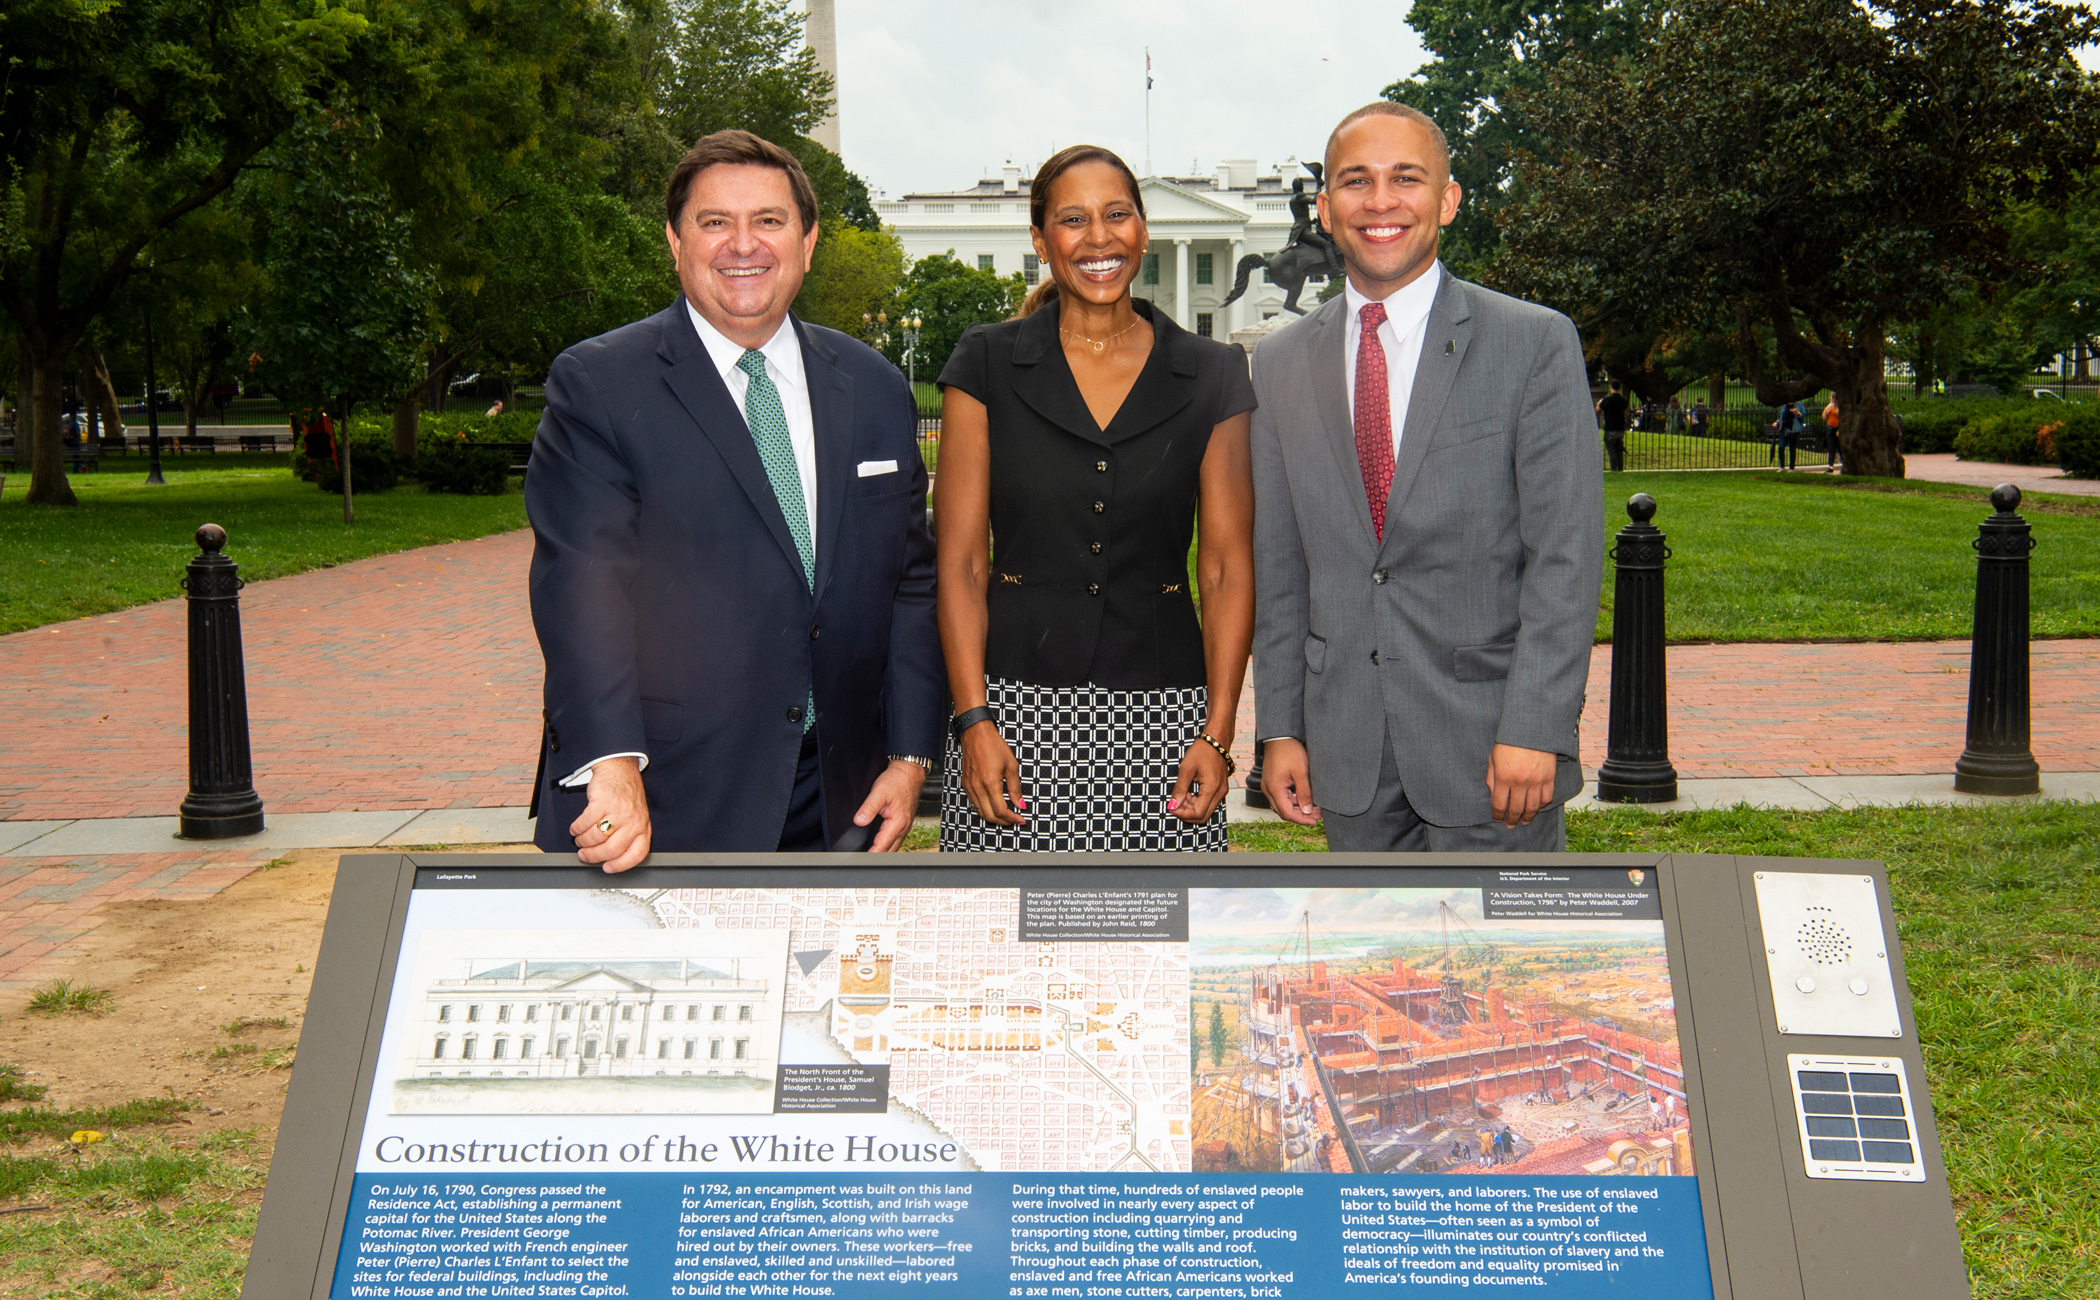 Stewart McLaurin, Hilary West and Royce Dickerson standing behind a Wayside Exhibit panel